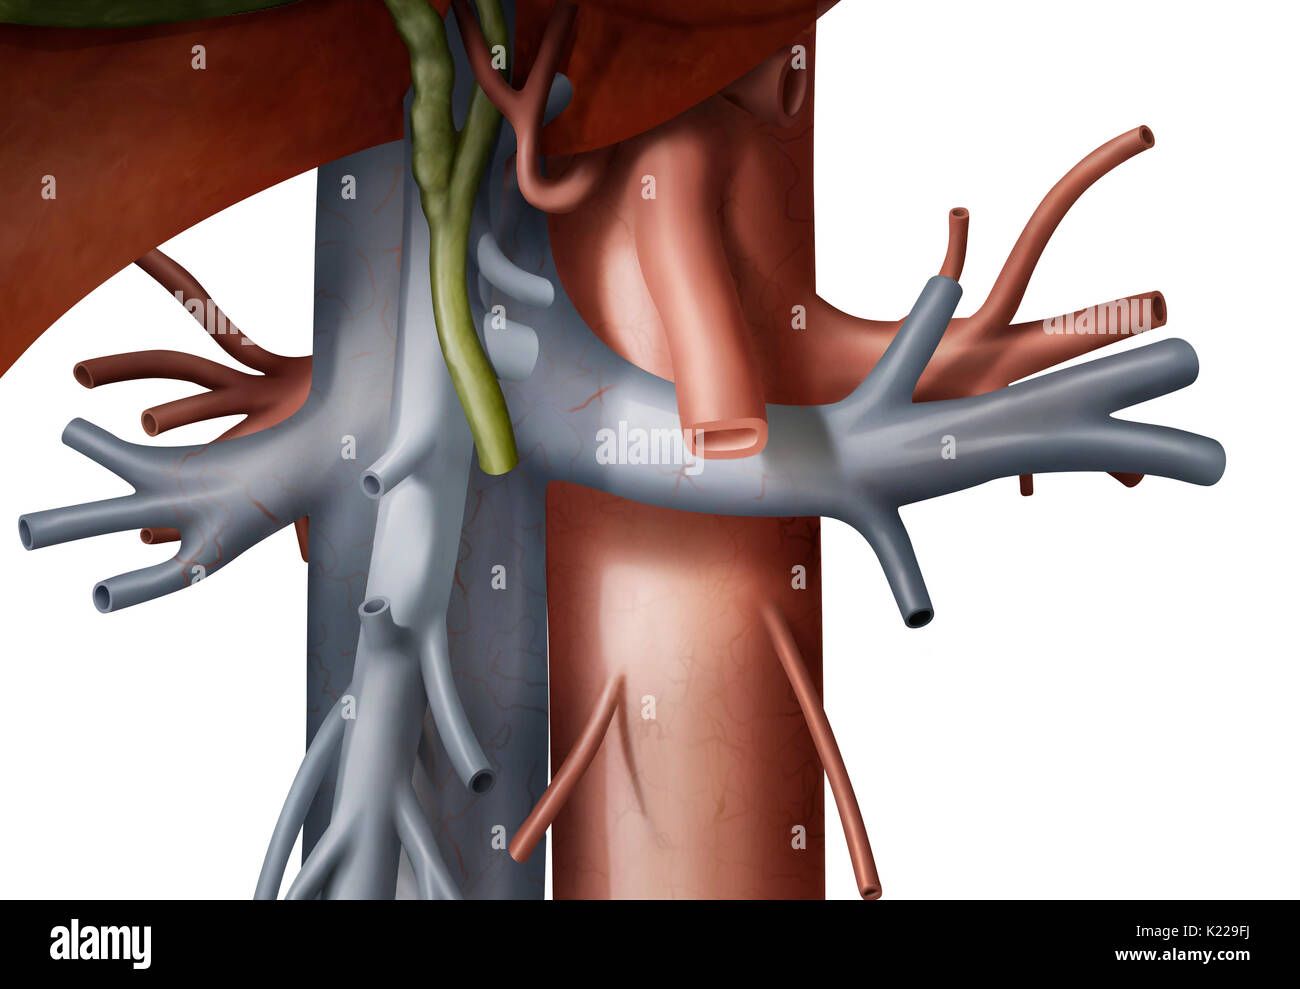 The hepatic portal vein leads blood to the liver from the intestines, stomach, pancreas, and spleen. Stock Photo